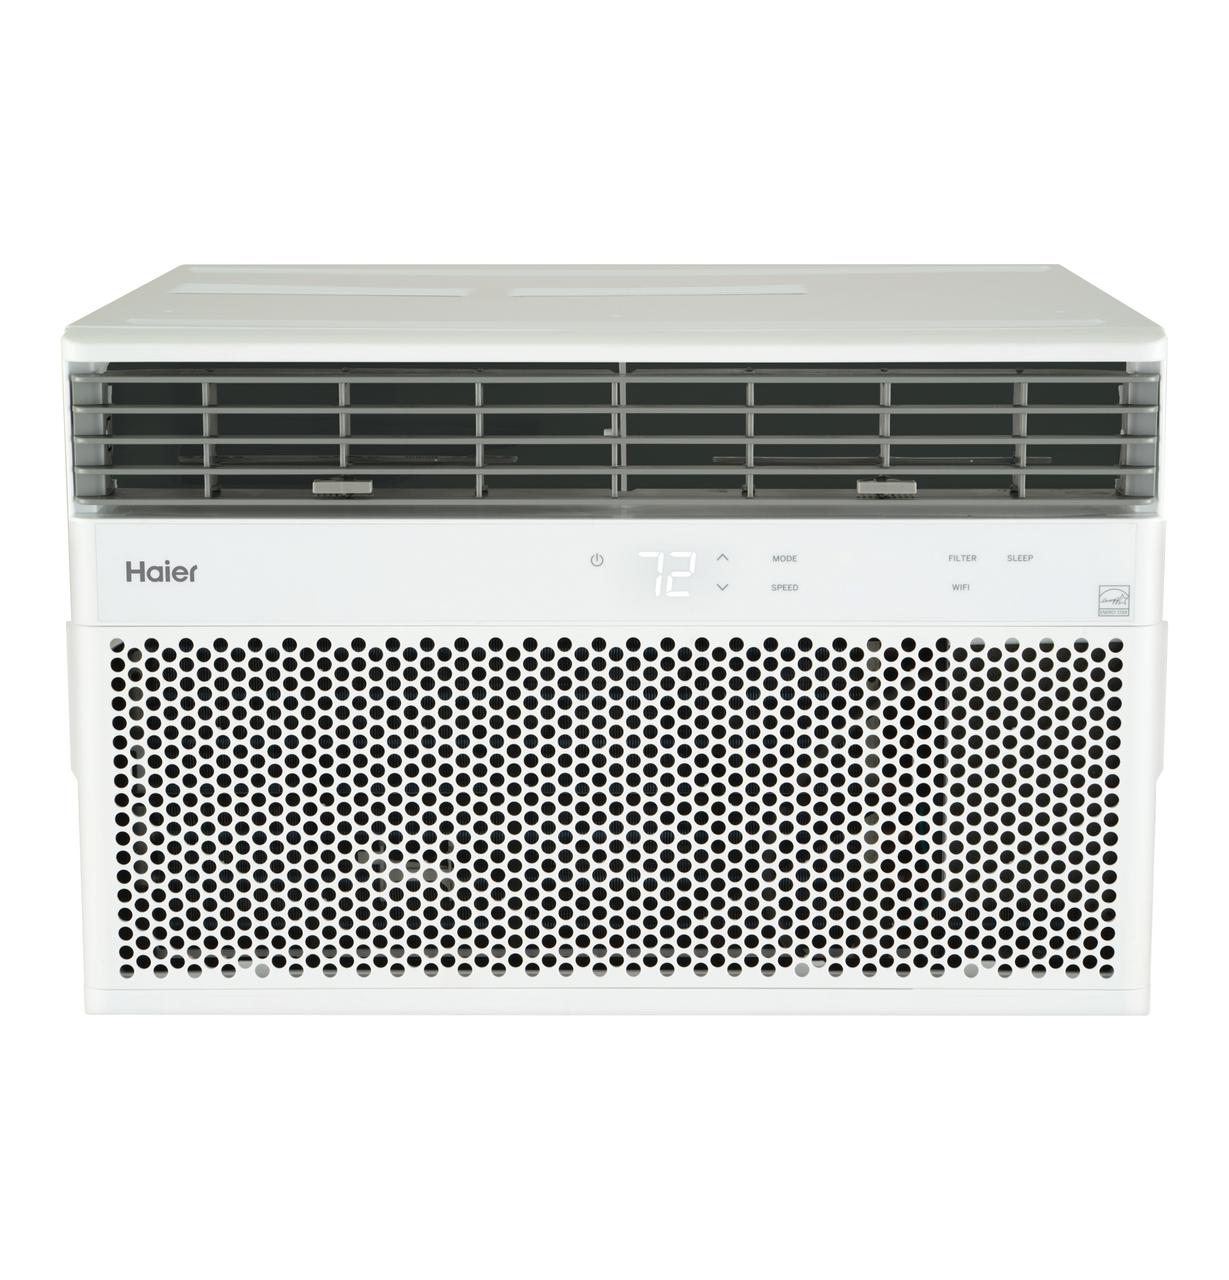 Haier QHEK10AC Haier 10,000 Btu Smart Electronic Window Air Conditioner For Medium Rooms Up To 450 Sq. Ft.